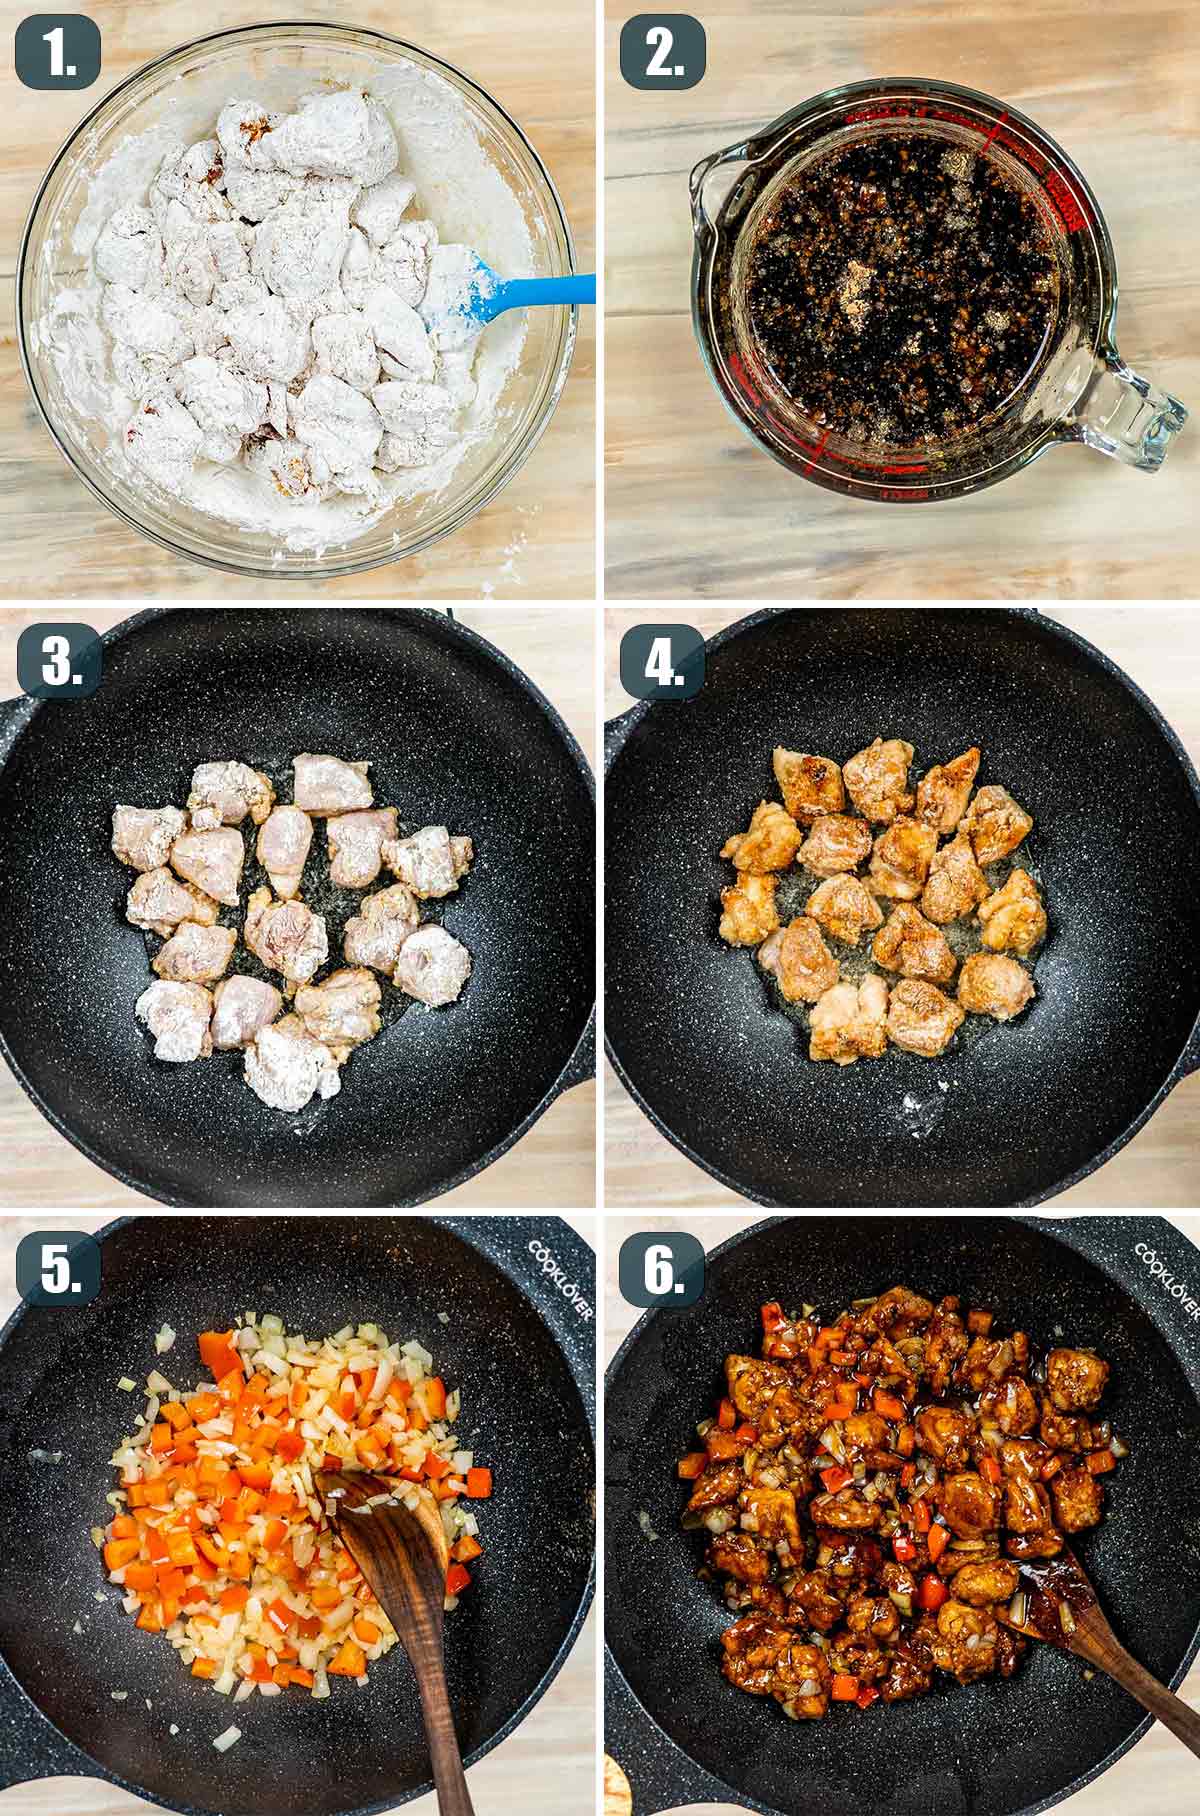 detailed process shots showing how to make black pepper chicken.